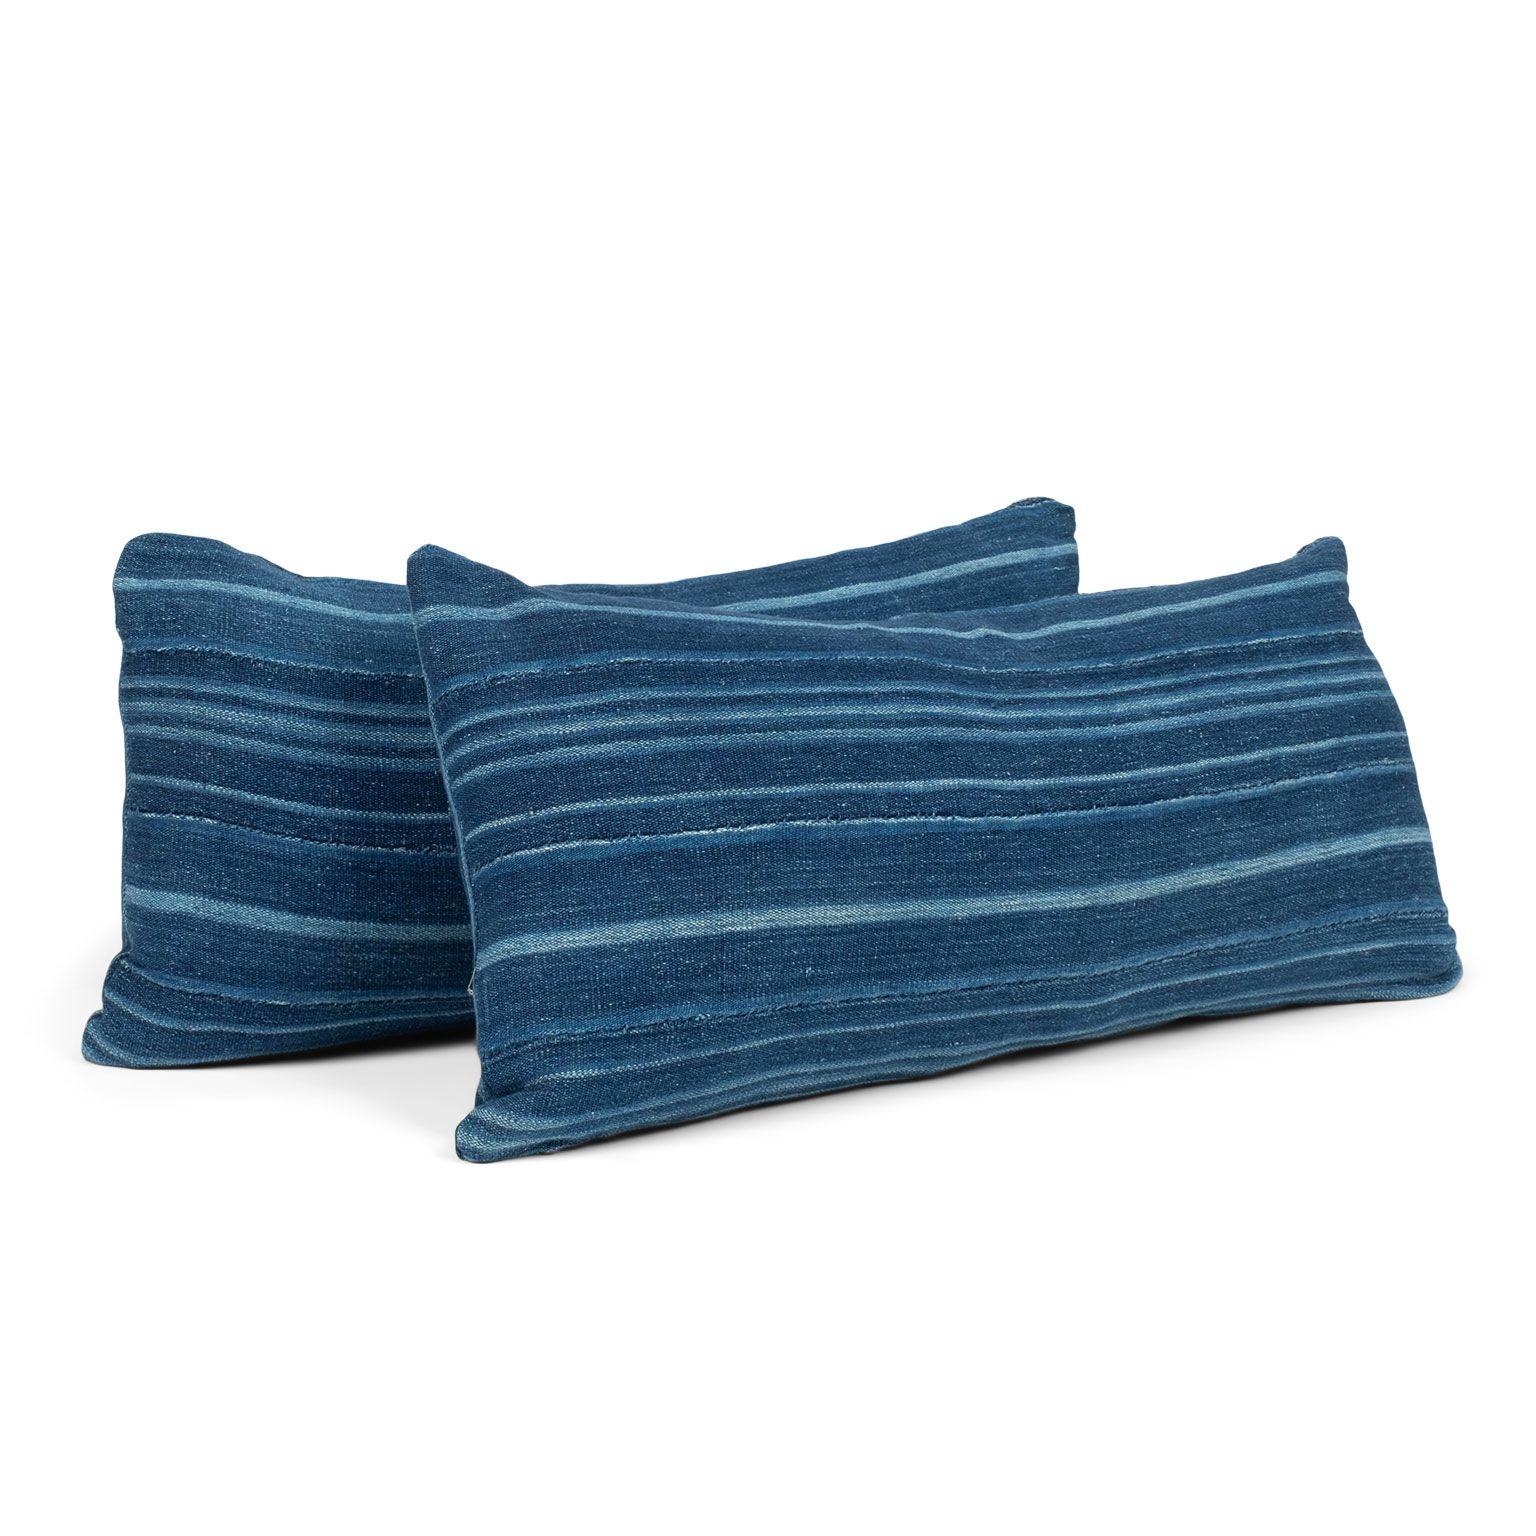 Large Faded Indigo Tone-on-Tone Striped Lumbar Cushion In Good Condition For Sale In Houston, TX